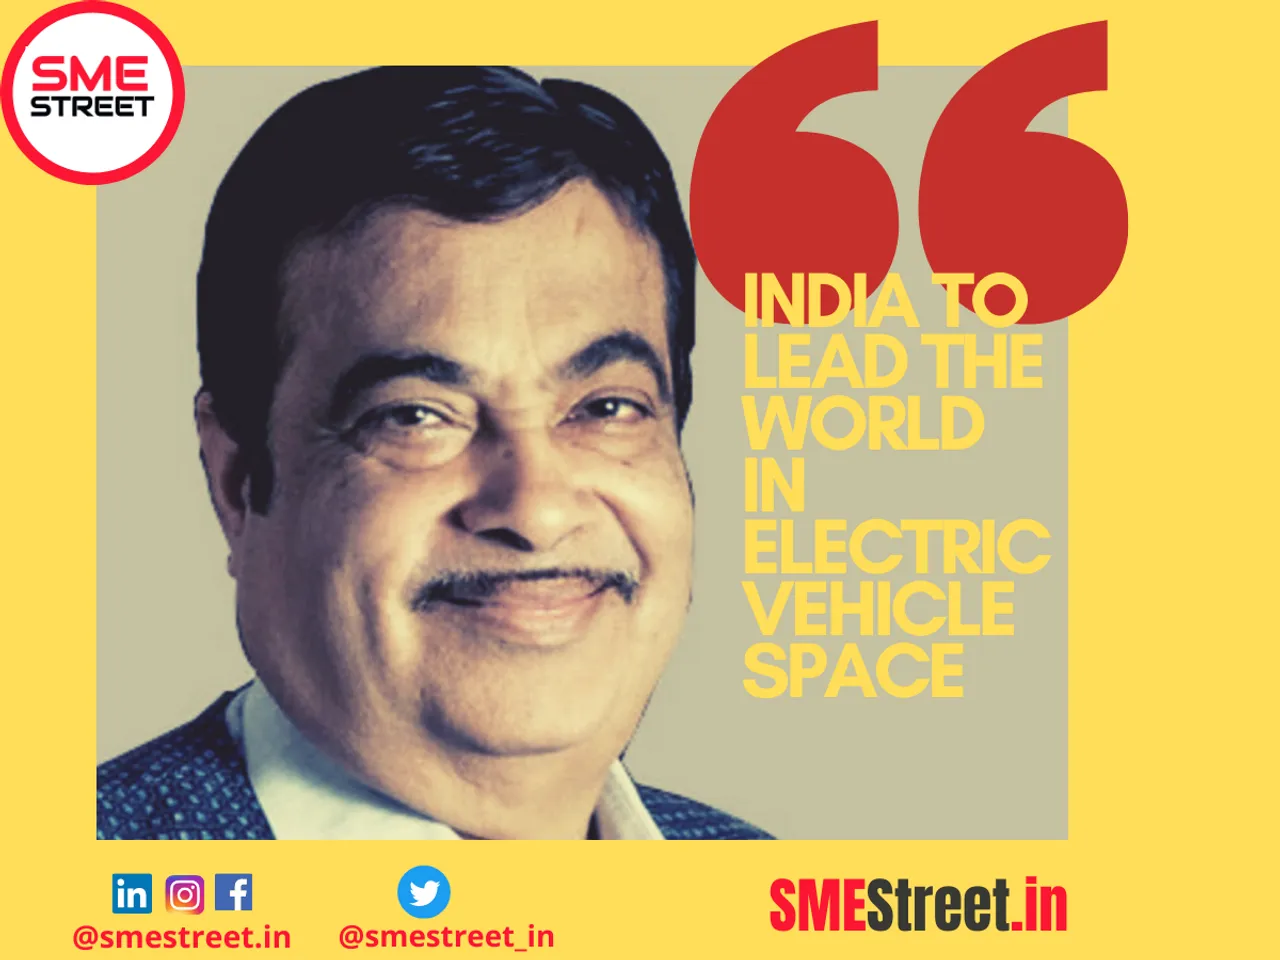 Priority of Government is to Fight Pollution and Develop Technology Towards EVs: Nitin Gadkari